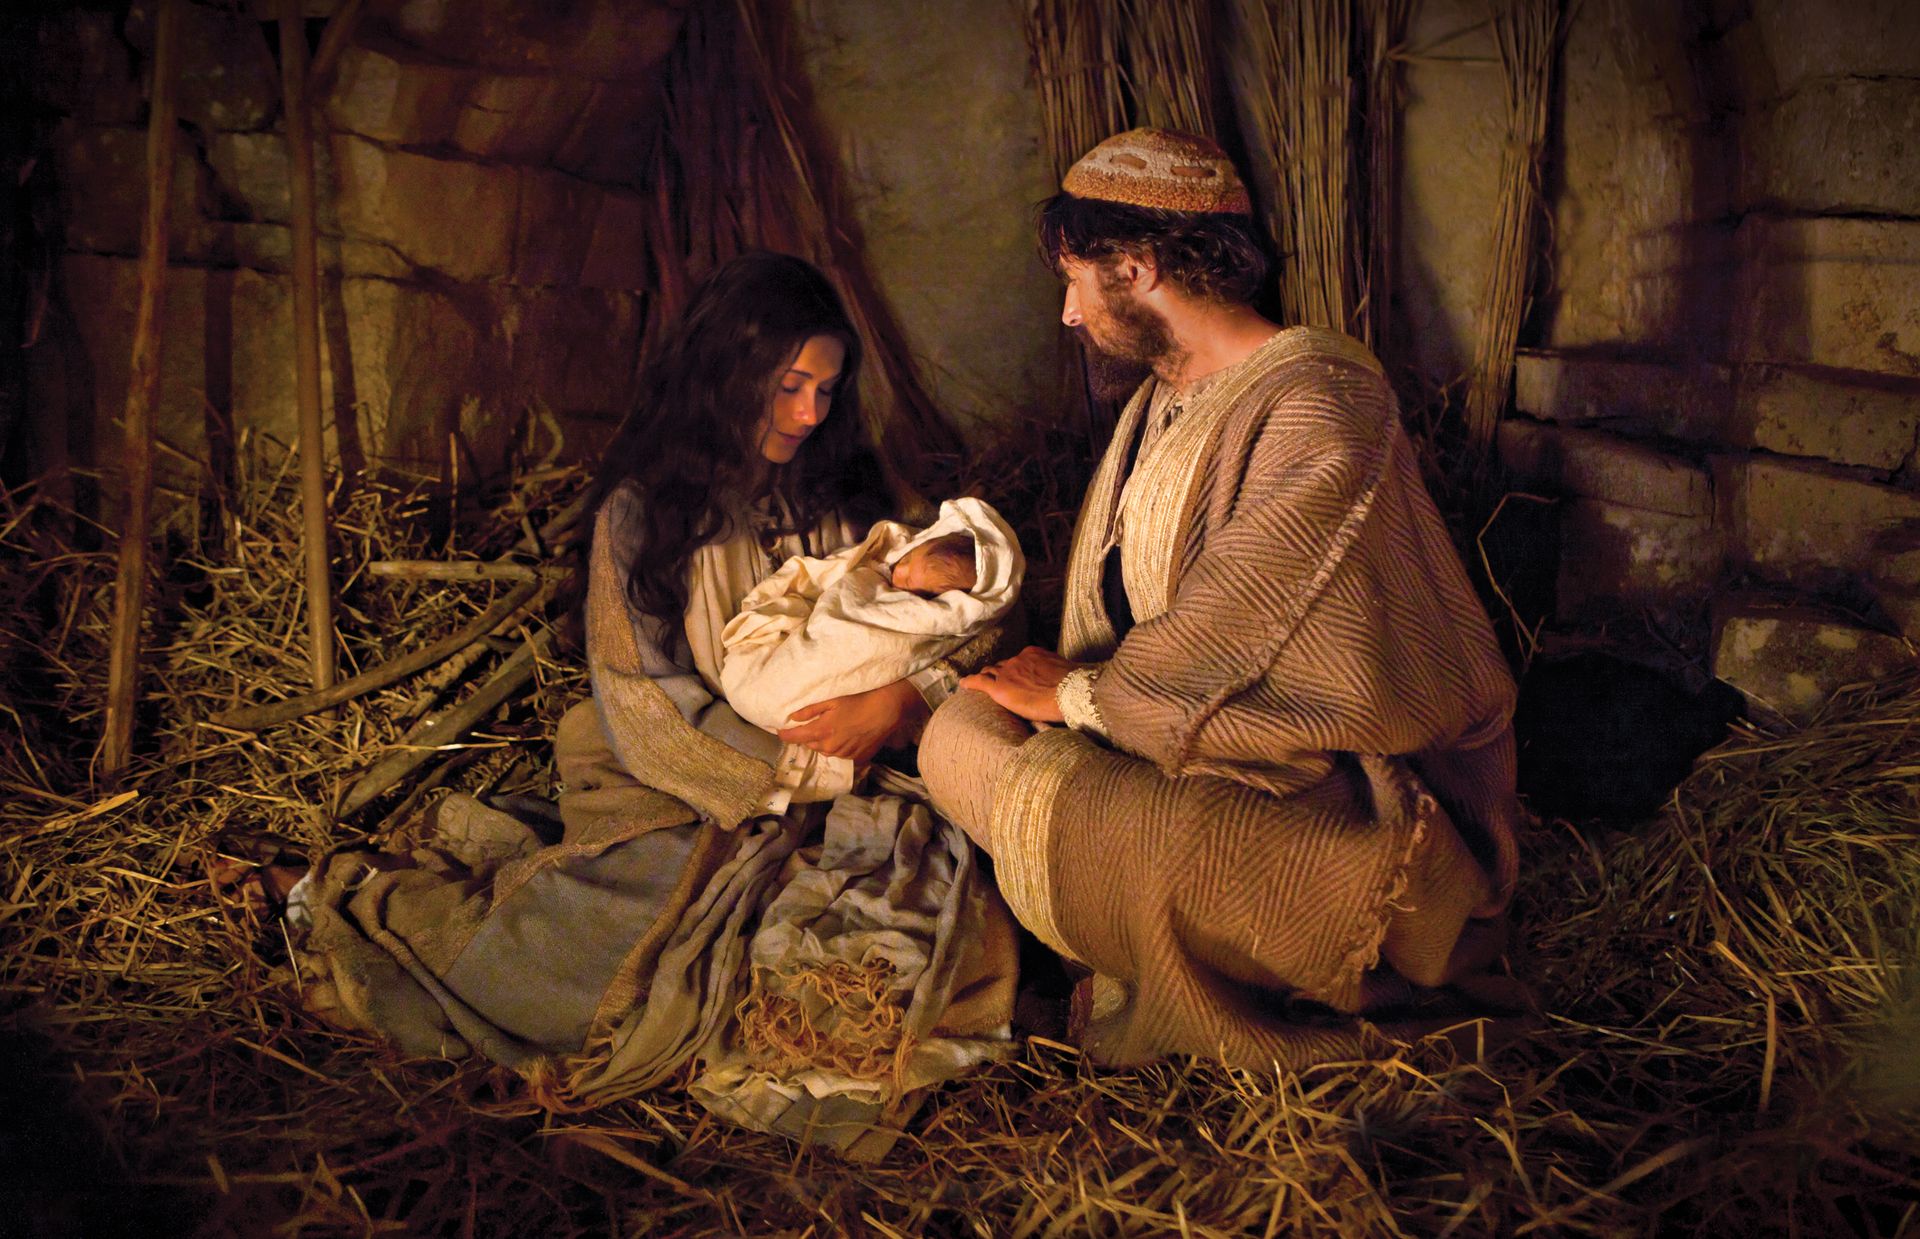 Joseph and Mary hold the baby Jesus on the night of His birth.